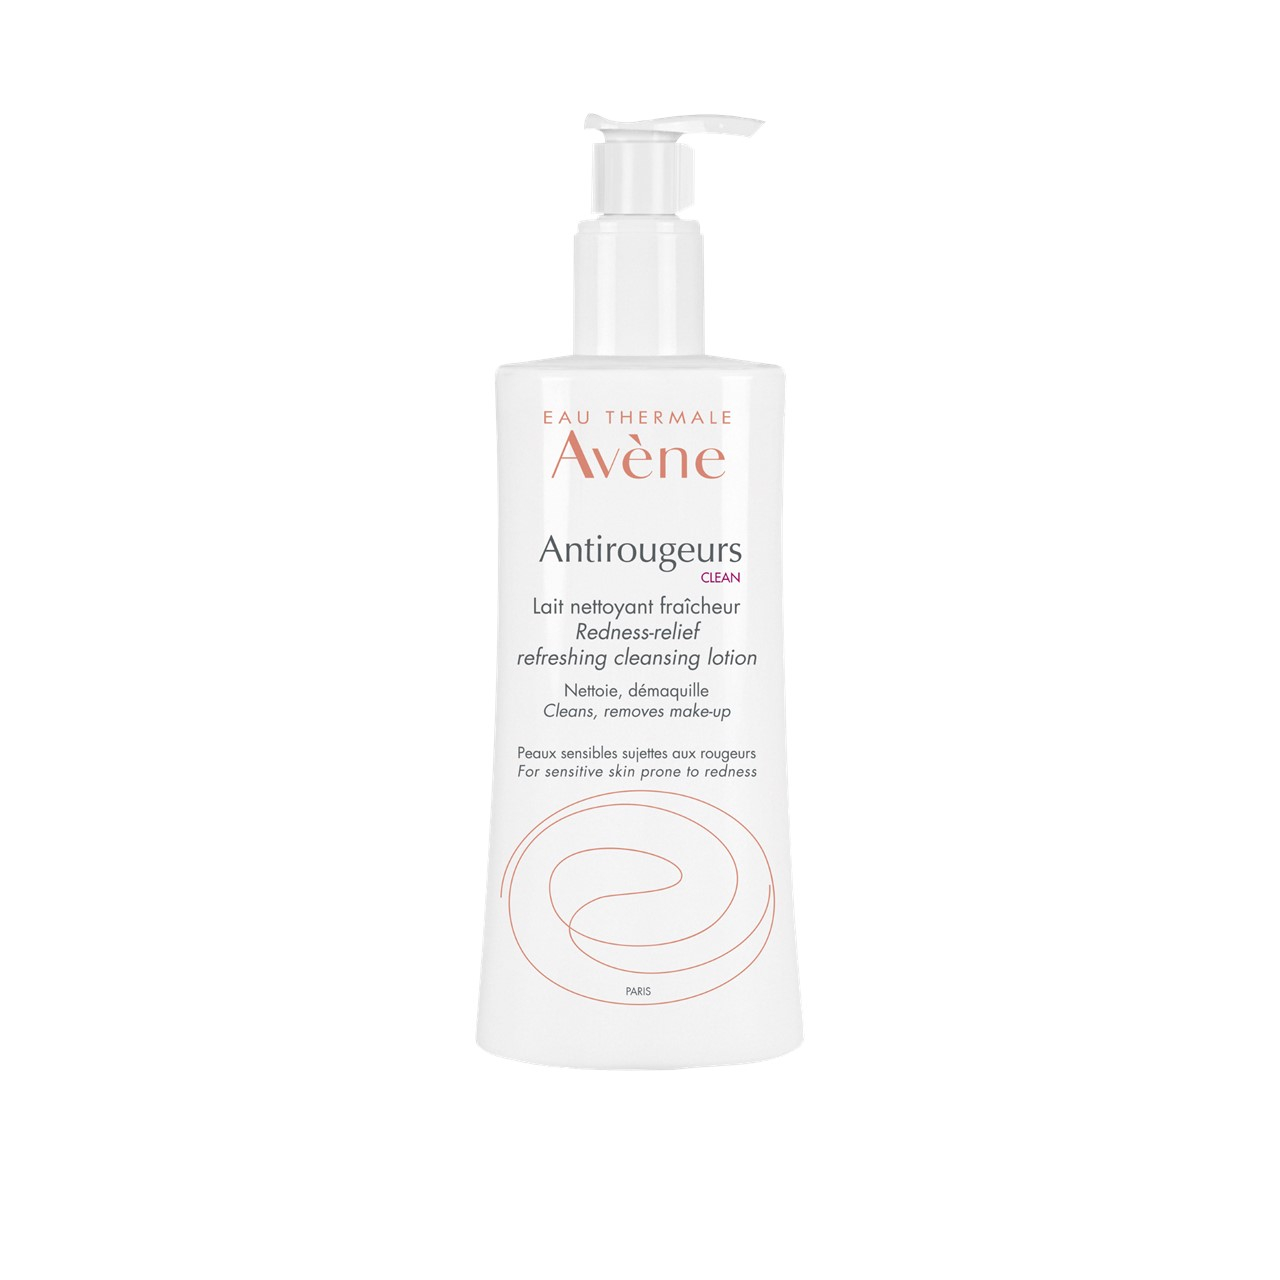 Avène Antirougeurs Clean Redness-Relief Cleansing Lotion 400ml